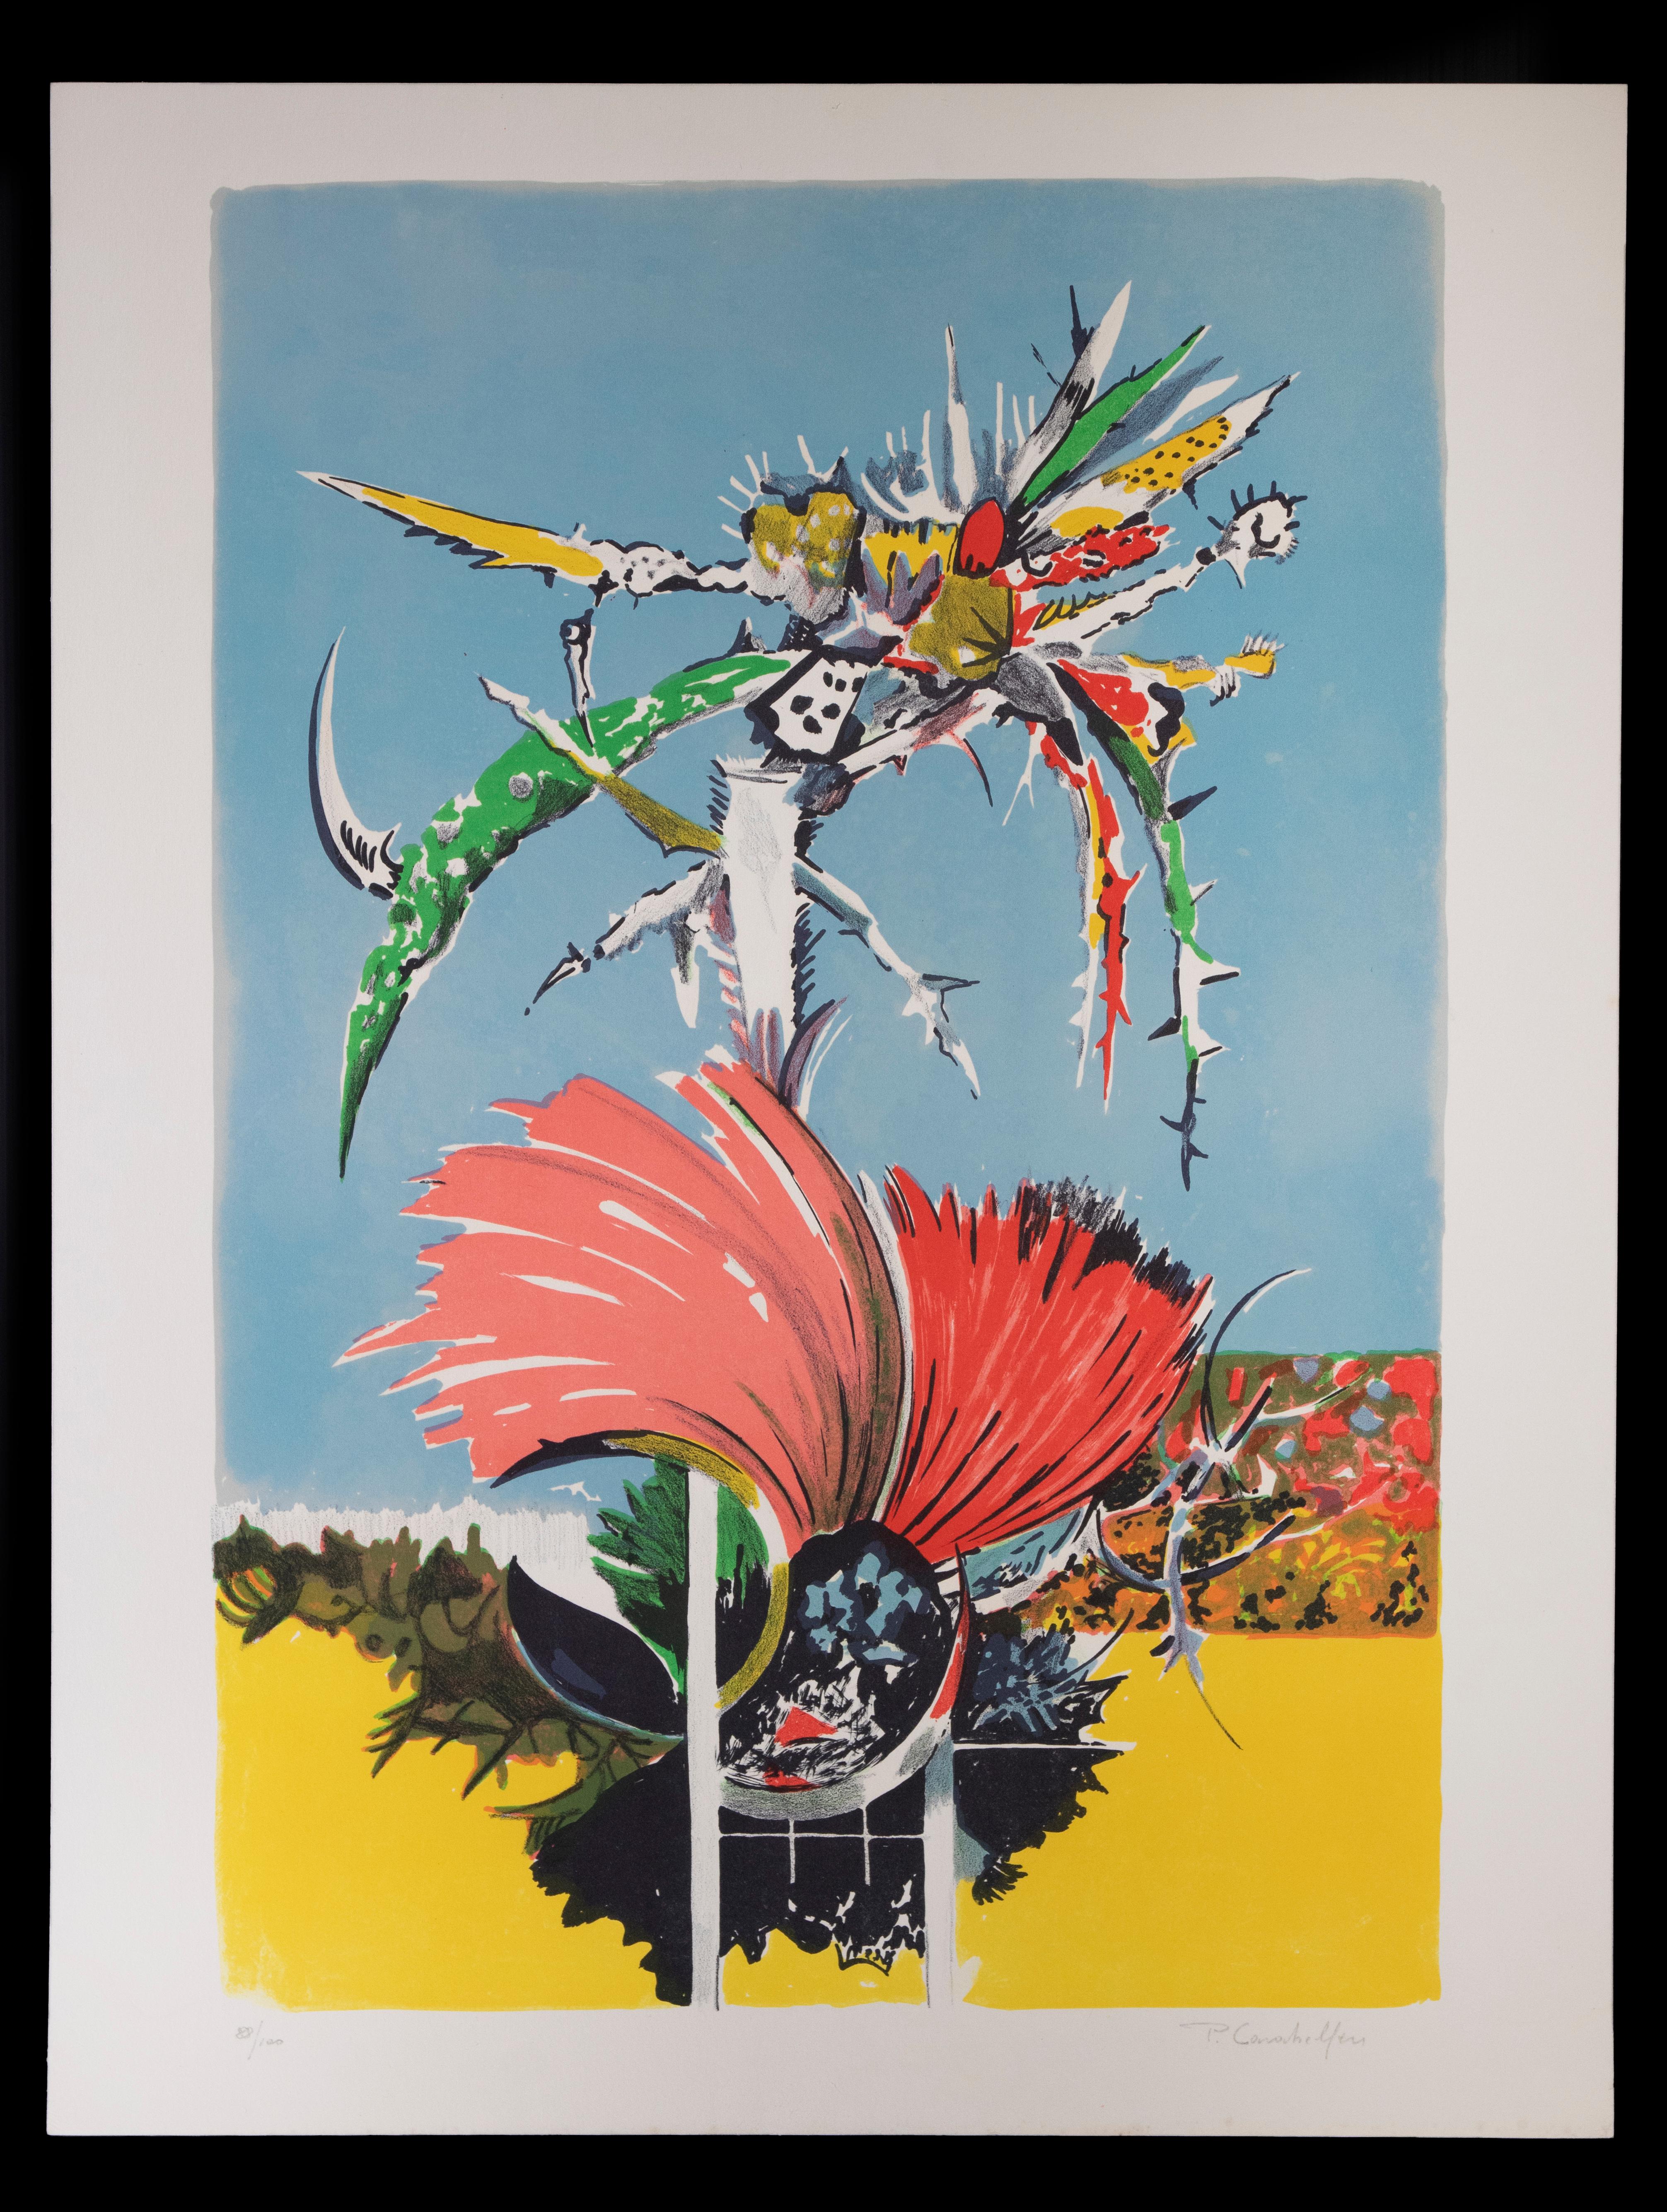 Nature Exposure is an original lithograph realized by Pietro Carabellese in the 1970s.

Hand-signed  on the bottom right. Numbered  on the bottom left. Edition of 100.